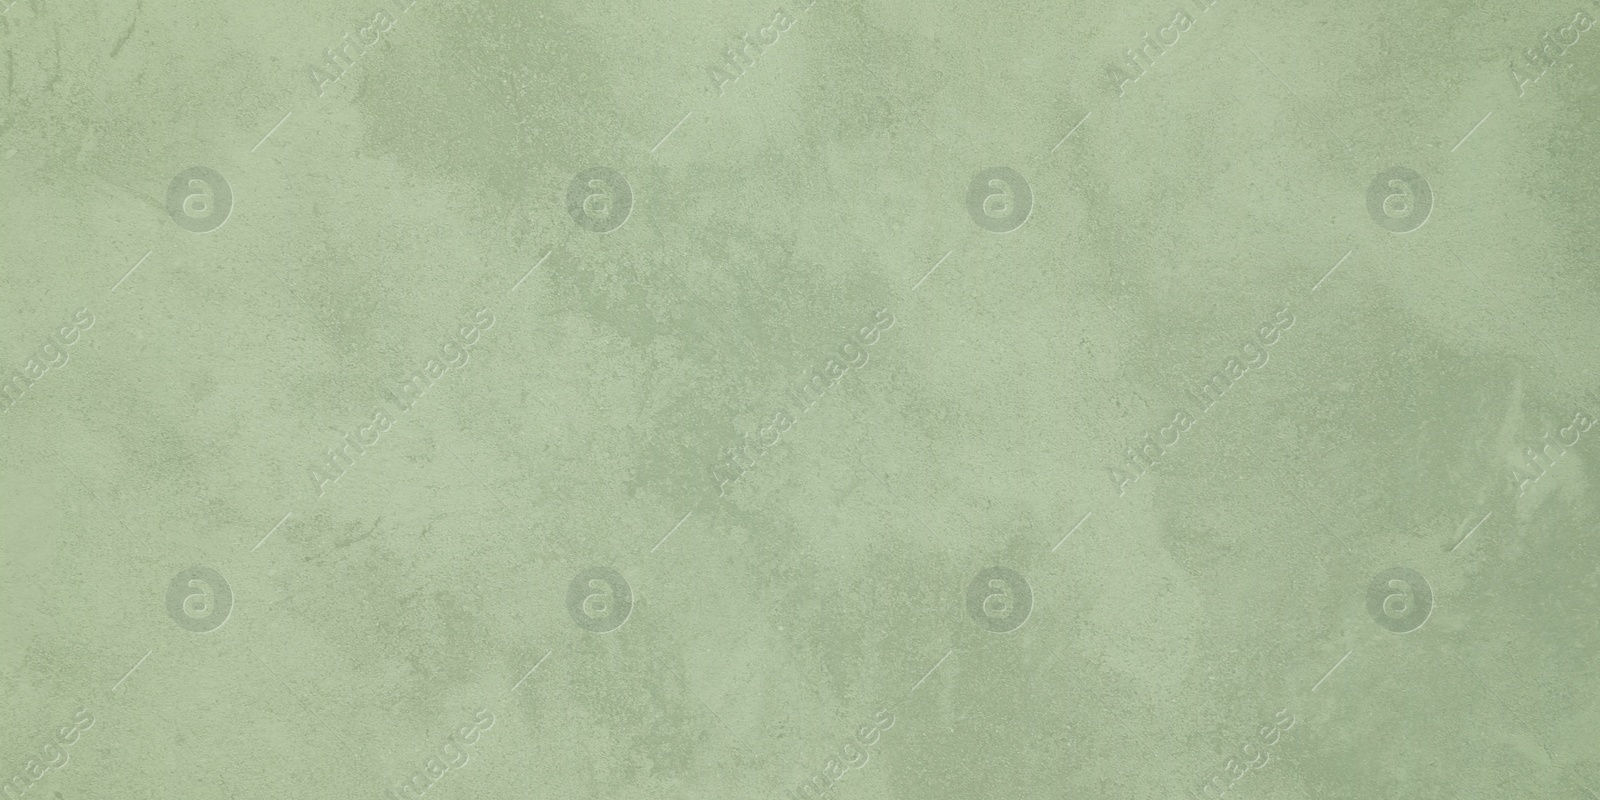 Image of Wall paper design. Light green textured concrete surface as background